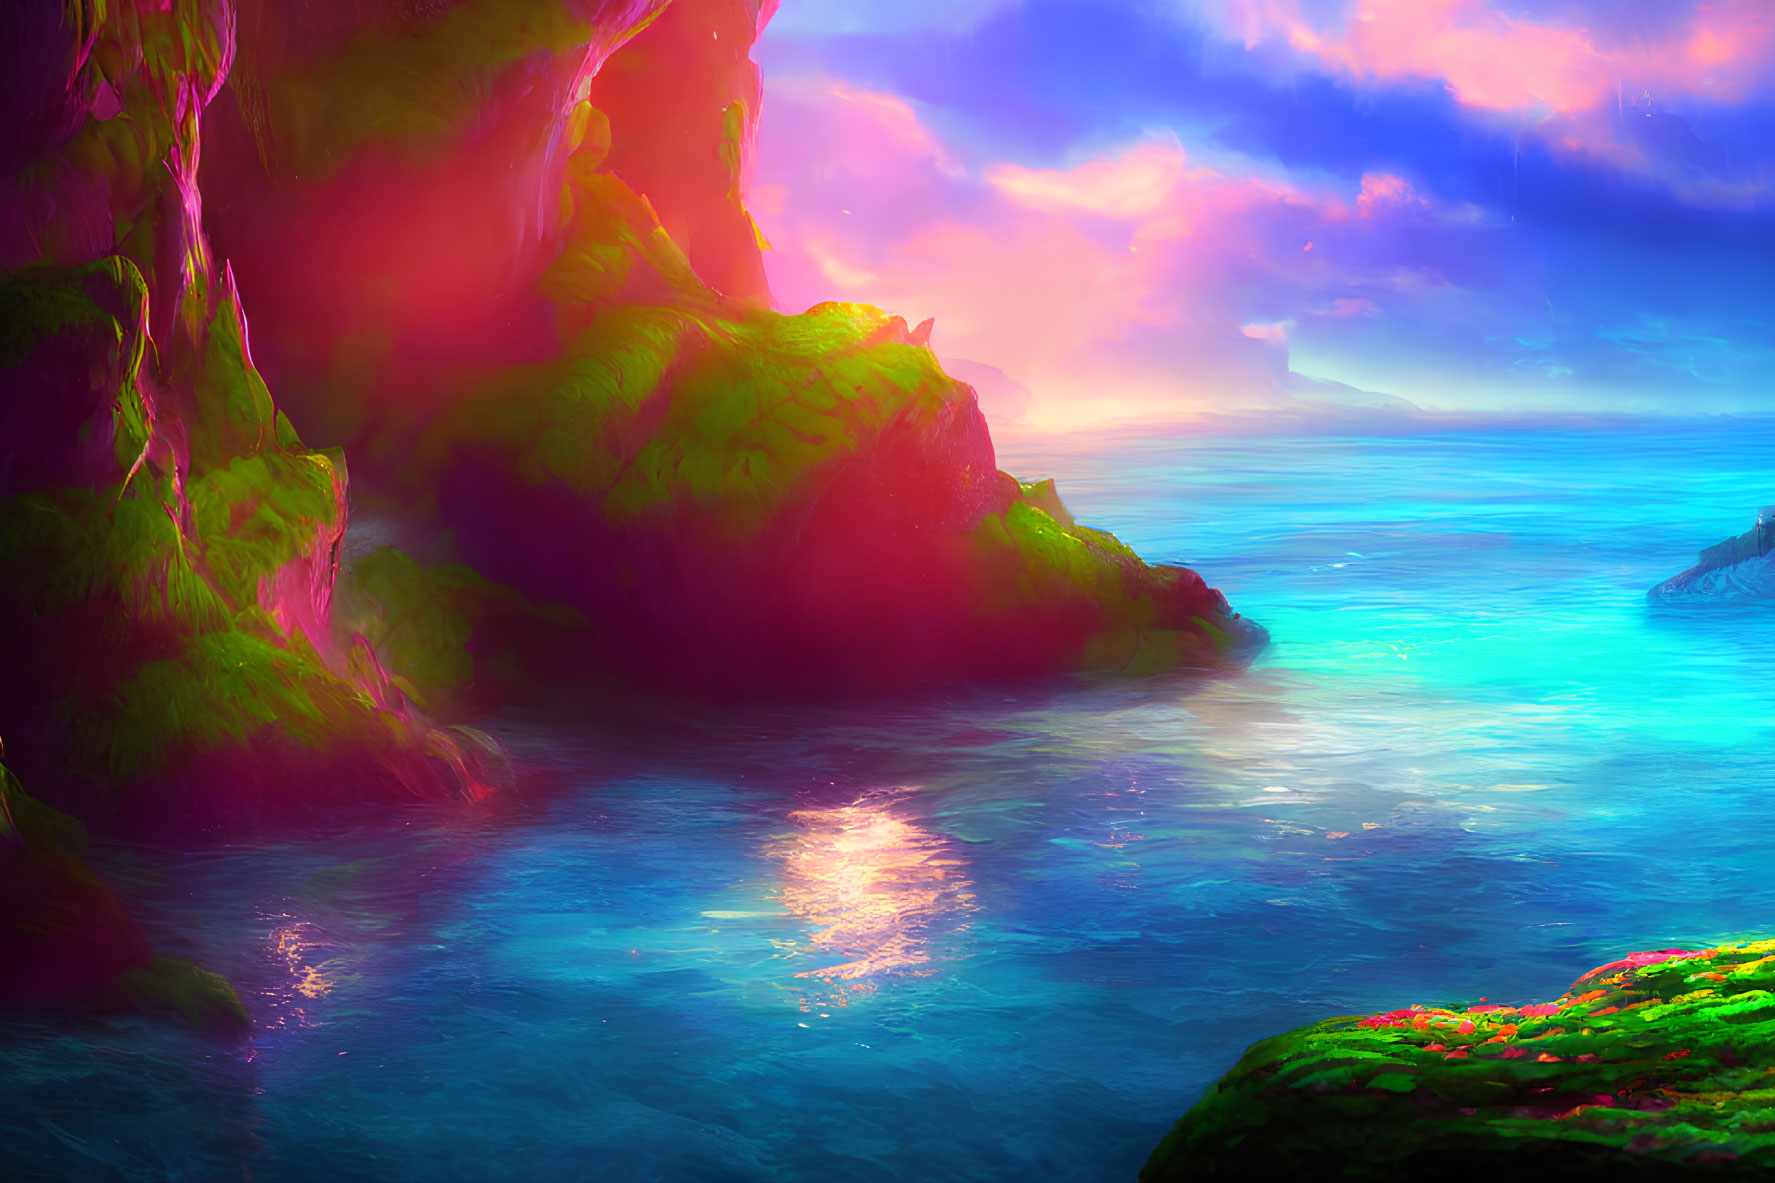 Vivid Pink and Blue Sky Over Mystical Seascape